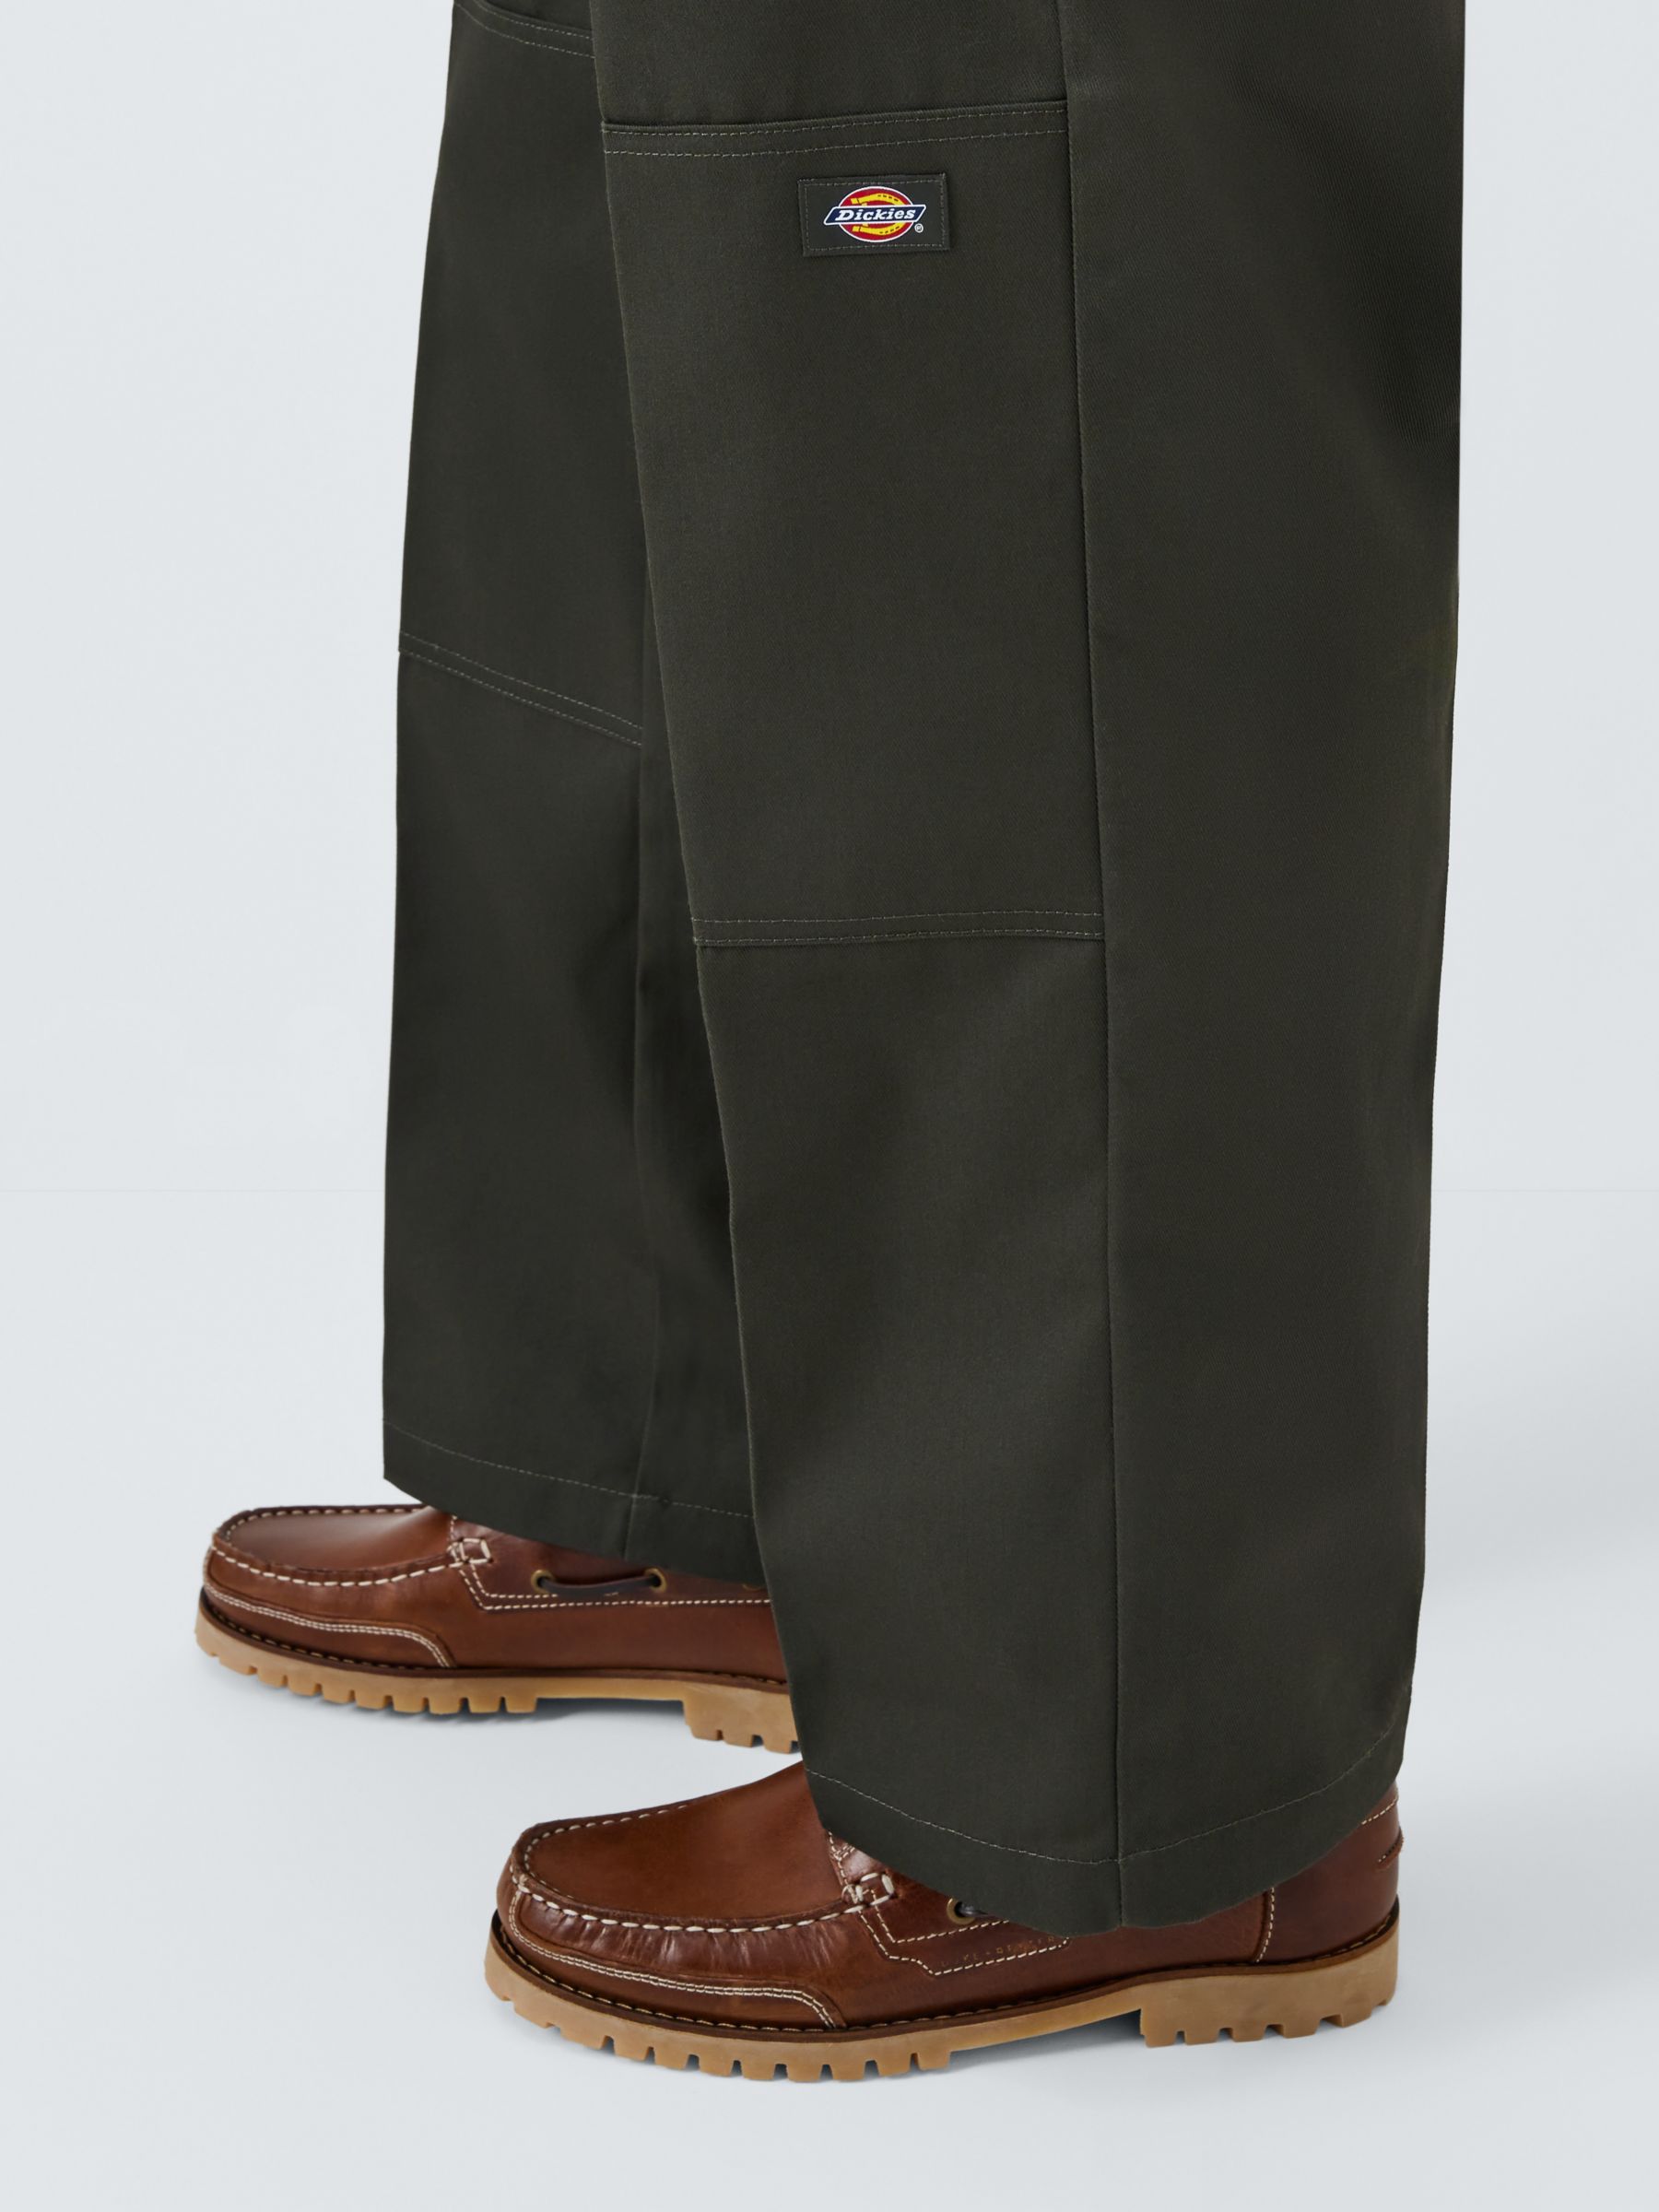 Buy Dickies Double Knee Relaxed Fit Work Trousers Online at johnlewis.com